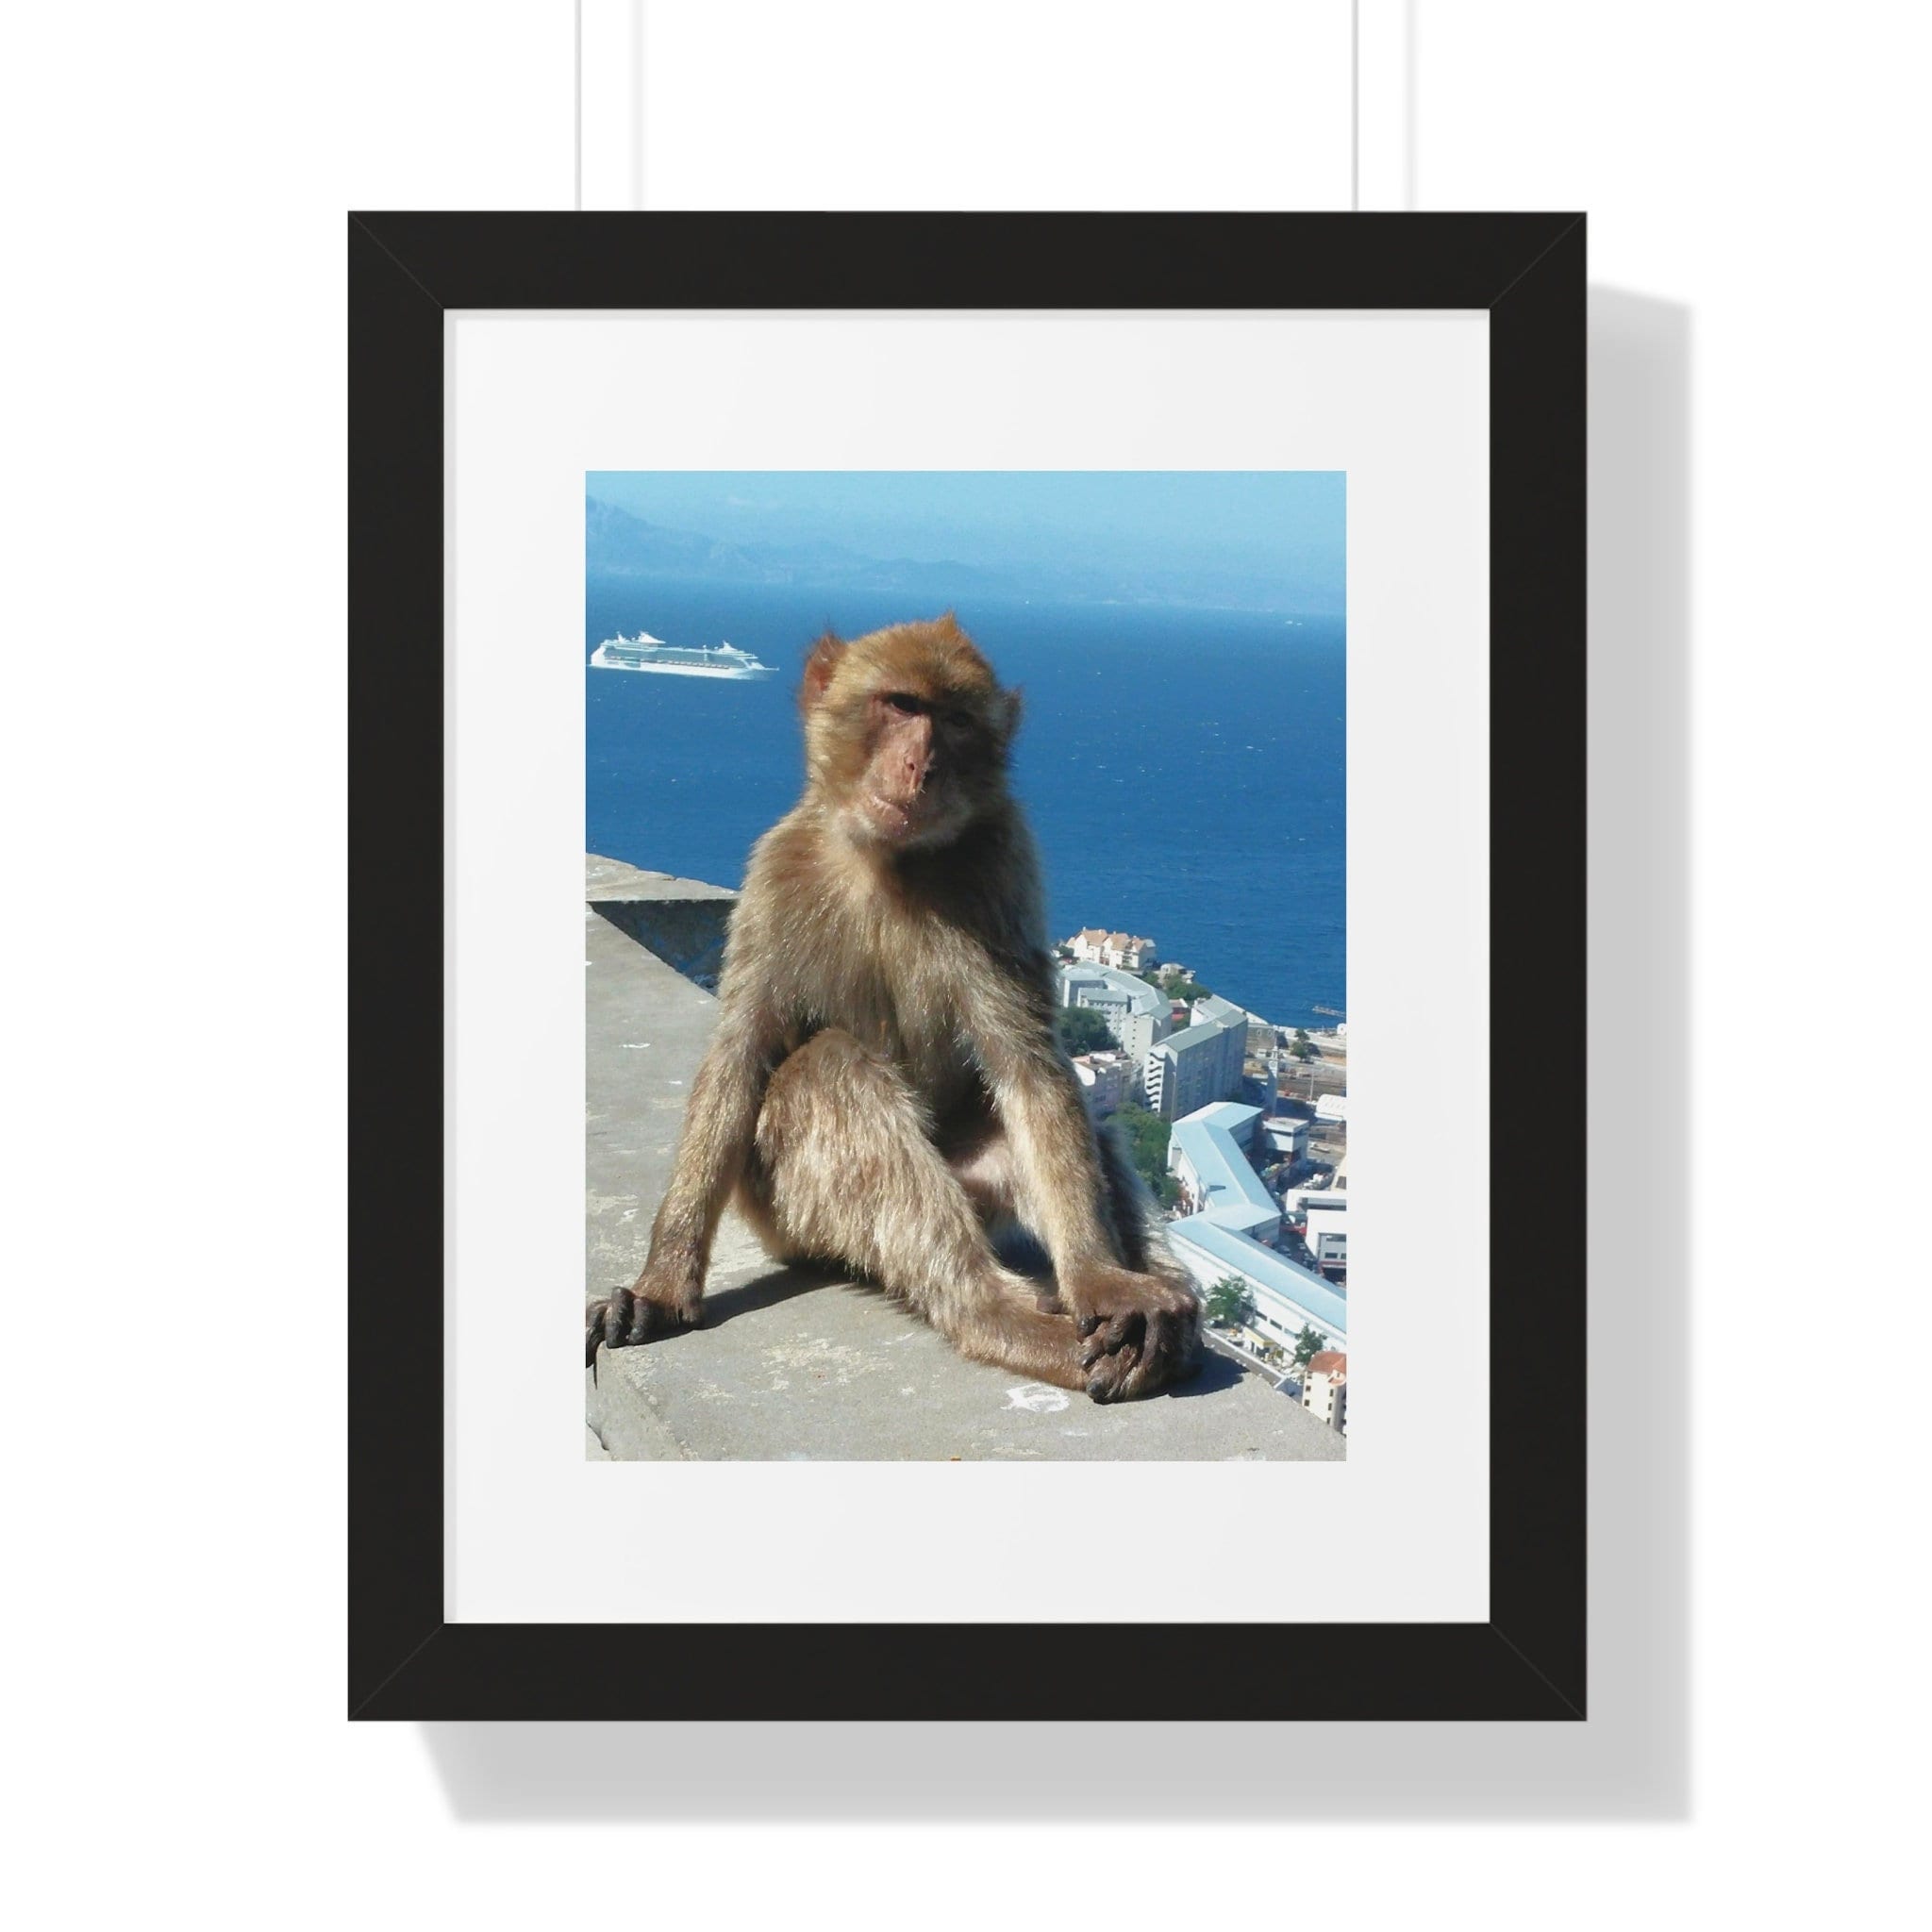 🐵🐵 A couple of #monkeys - Gibraltar Arts and Crafts